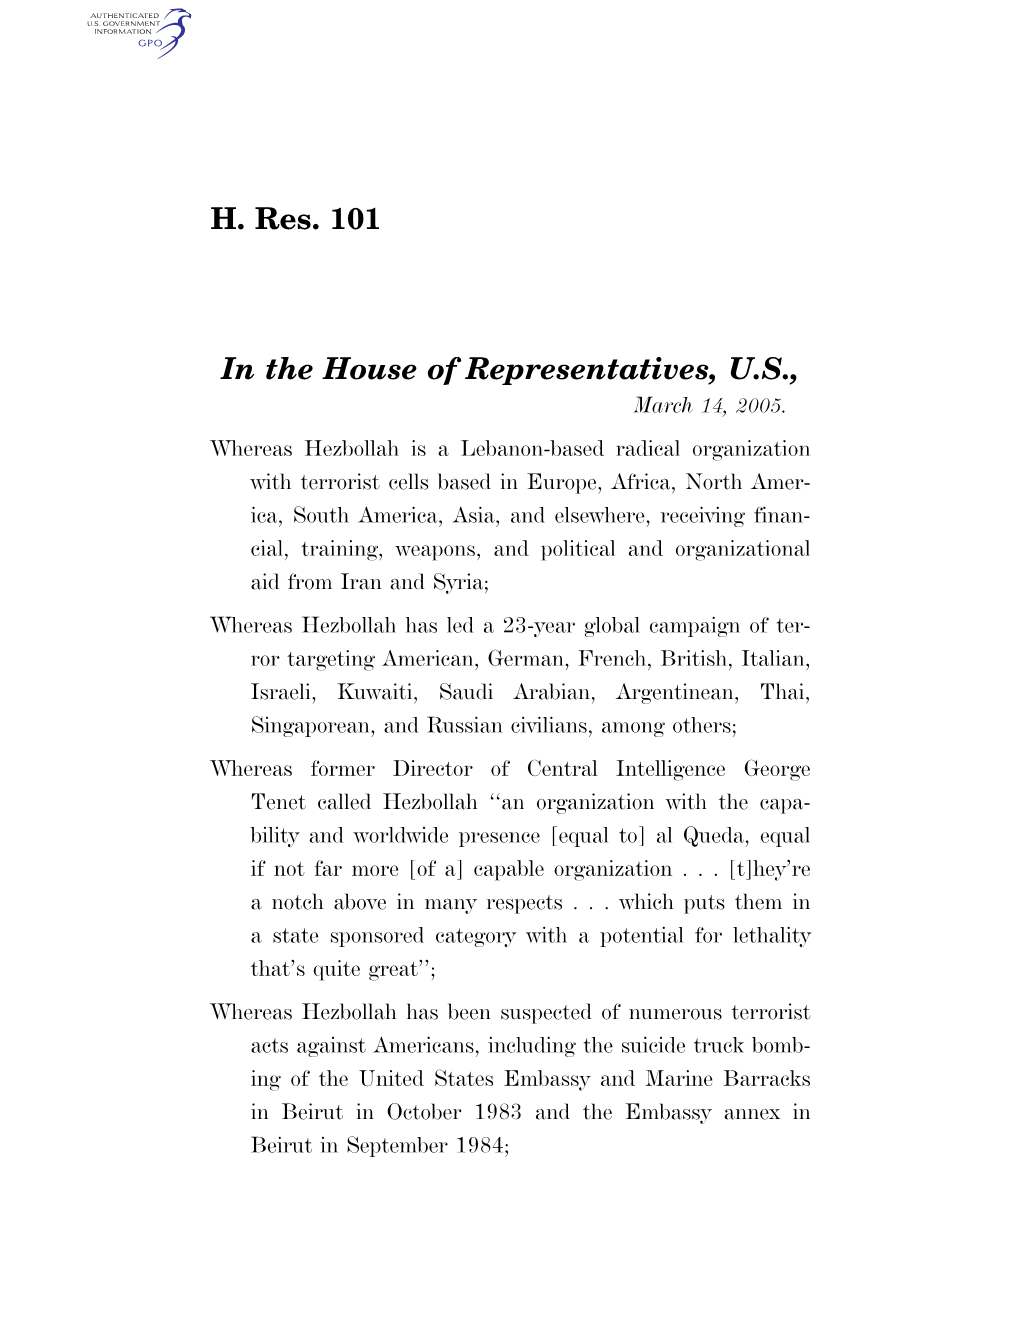 H. Res. 101 in the House of Representatives, U.S